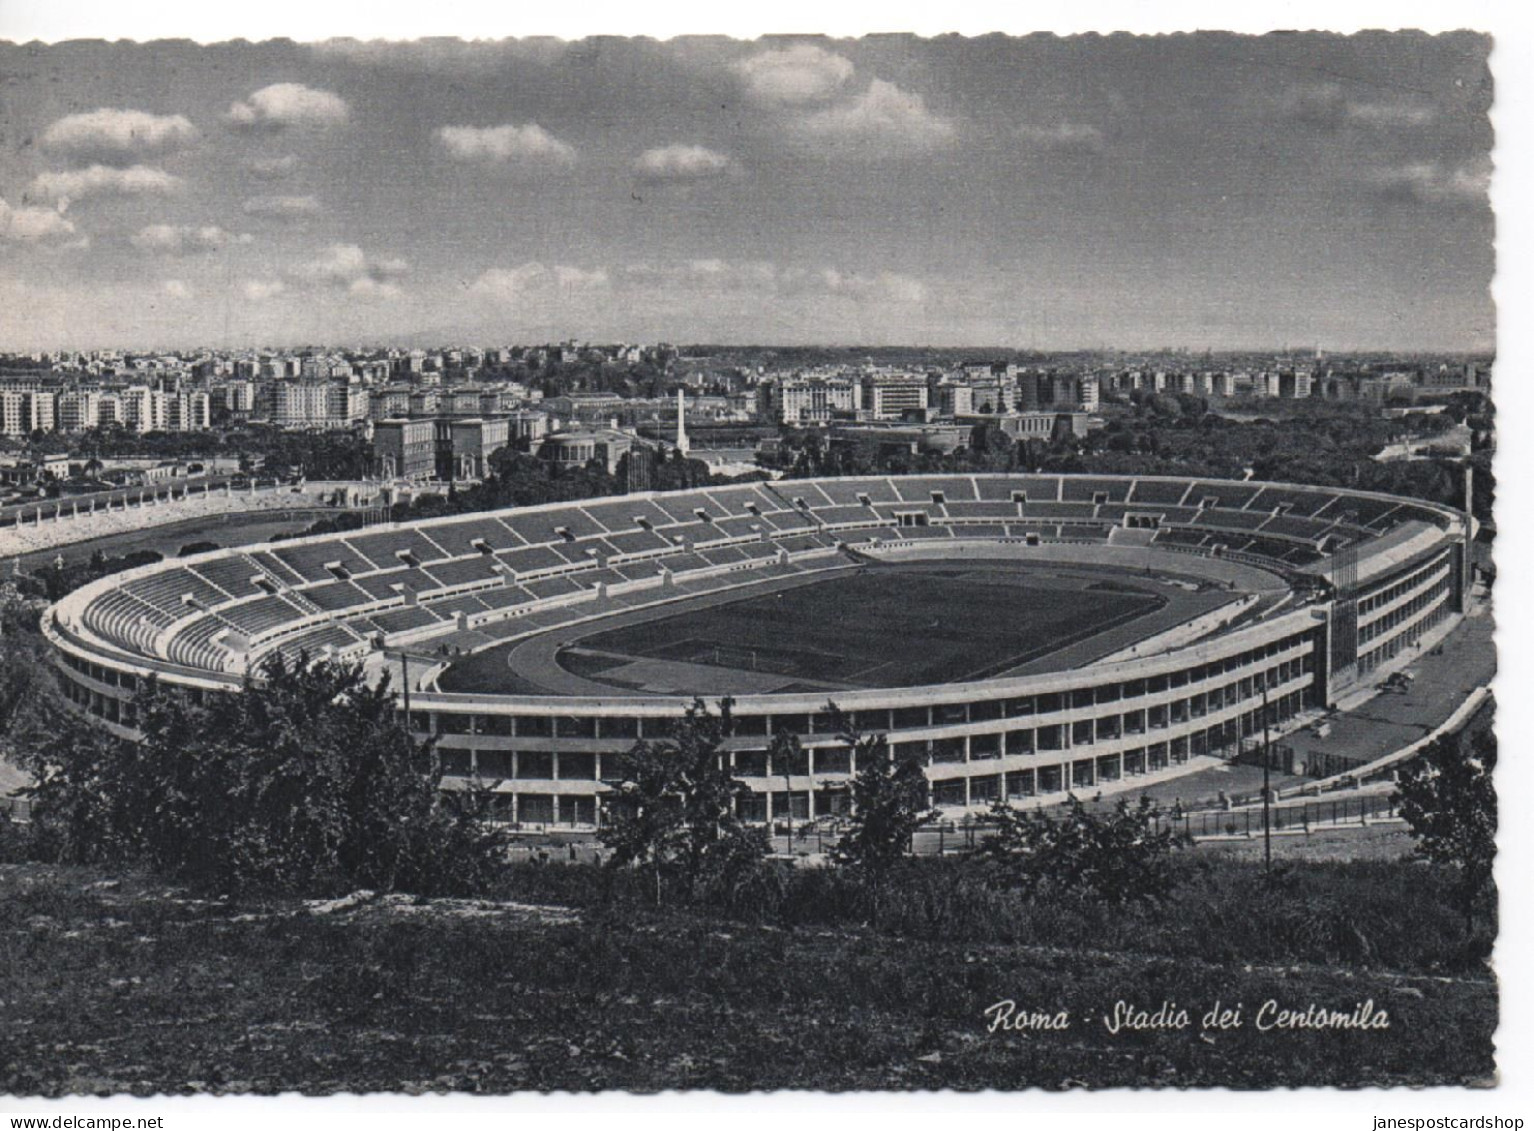 THE STADIUM OF HUNDRED THOUSAND SPECTATORS - LARGER SIZED POSTCARD - UNPOSTED - IN GOOD CONDITION - 1950's ? - Stadi & Strutture Sportive